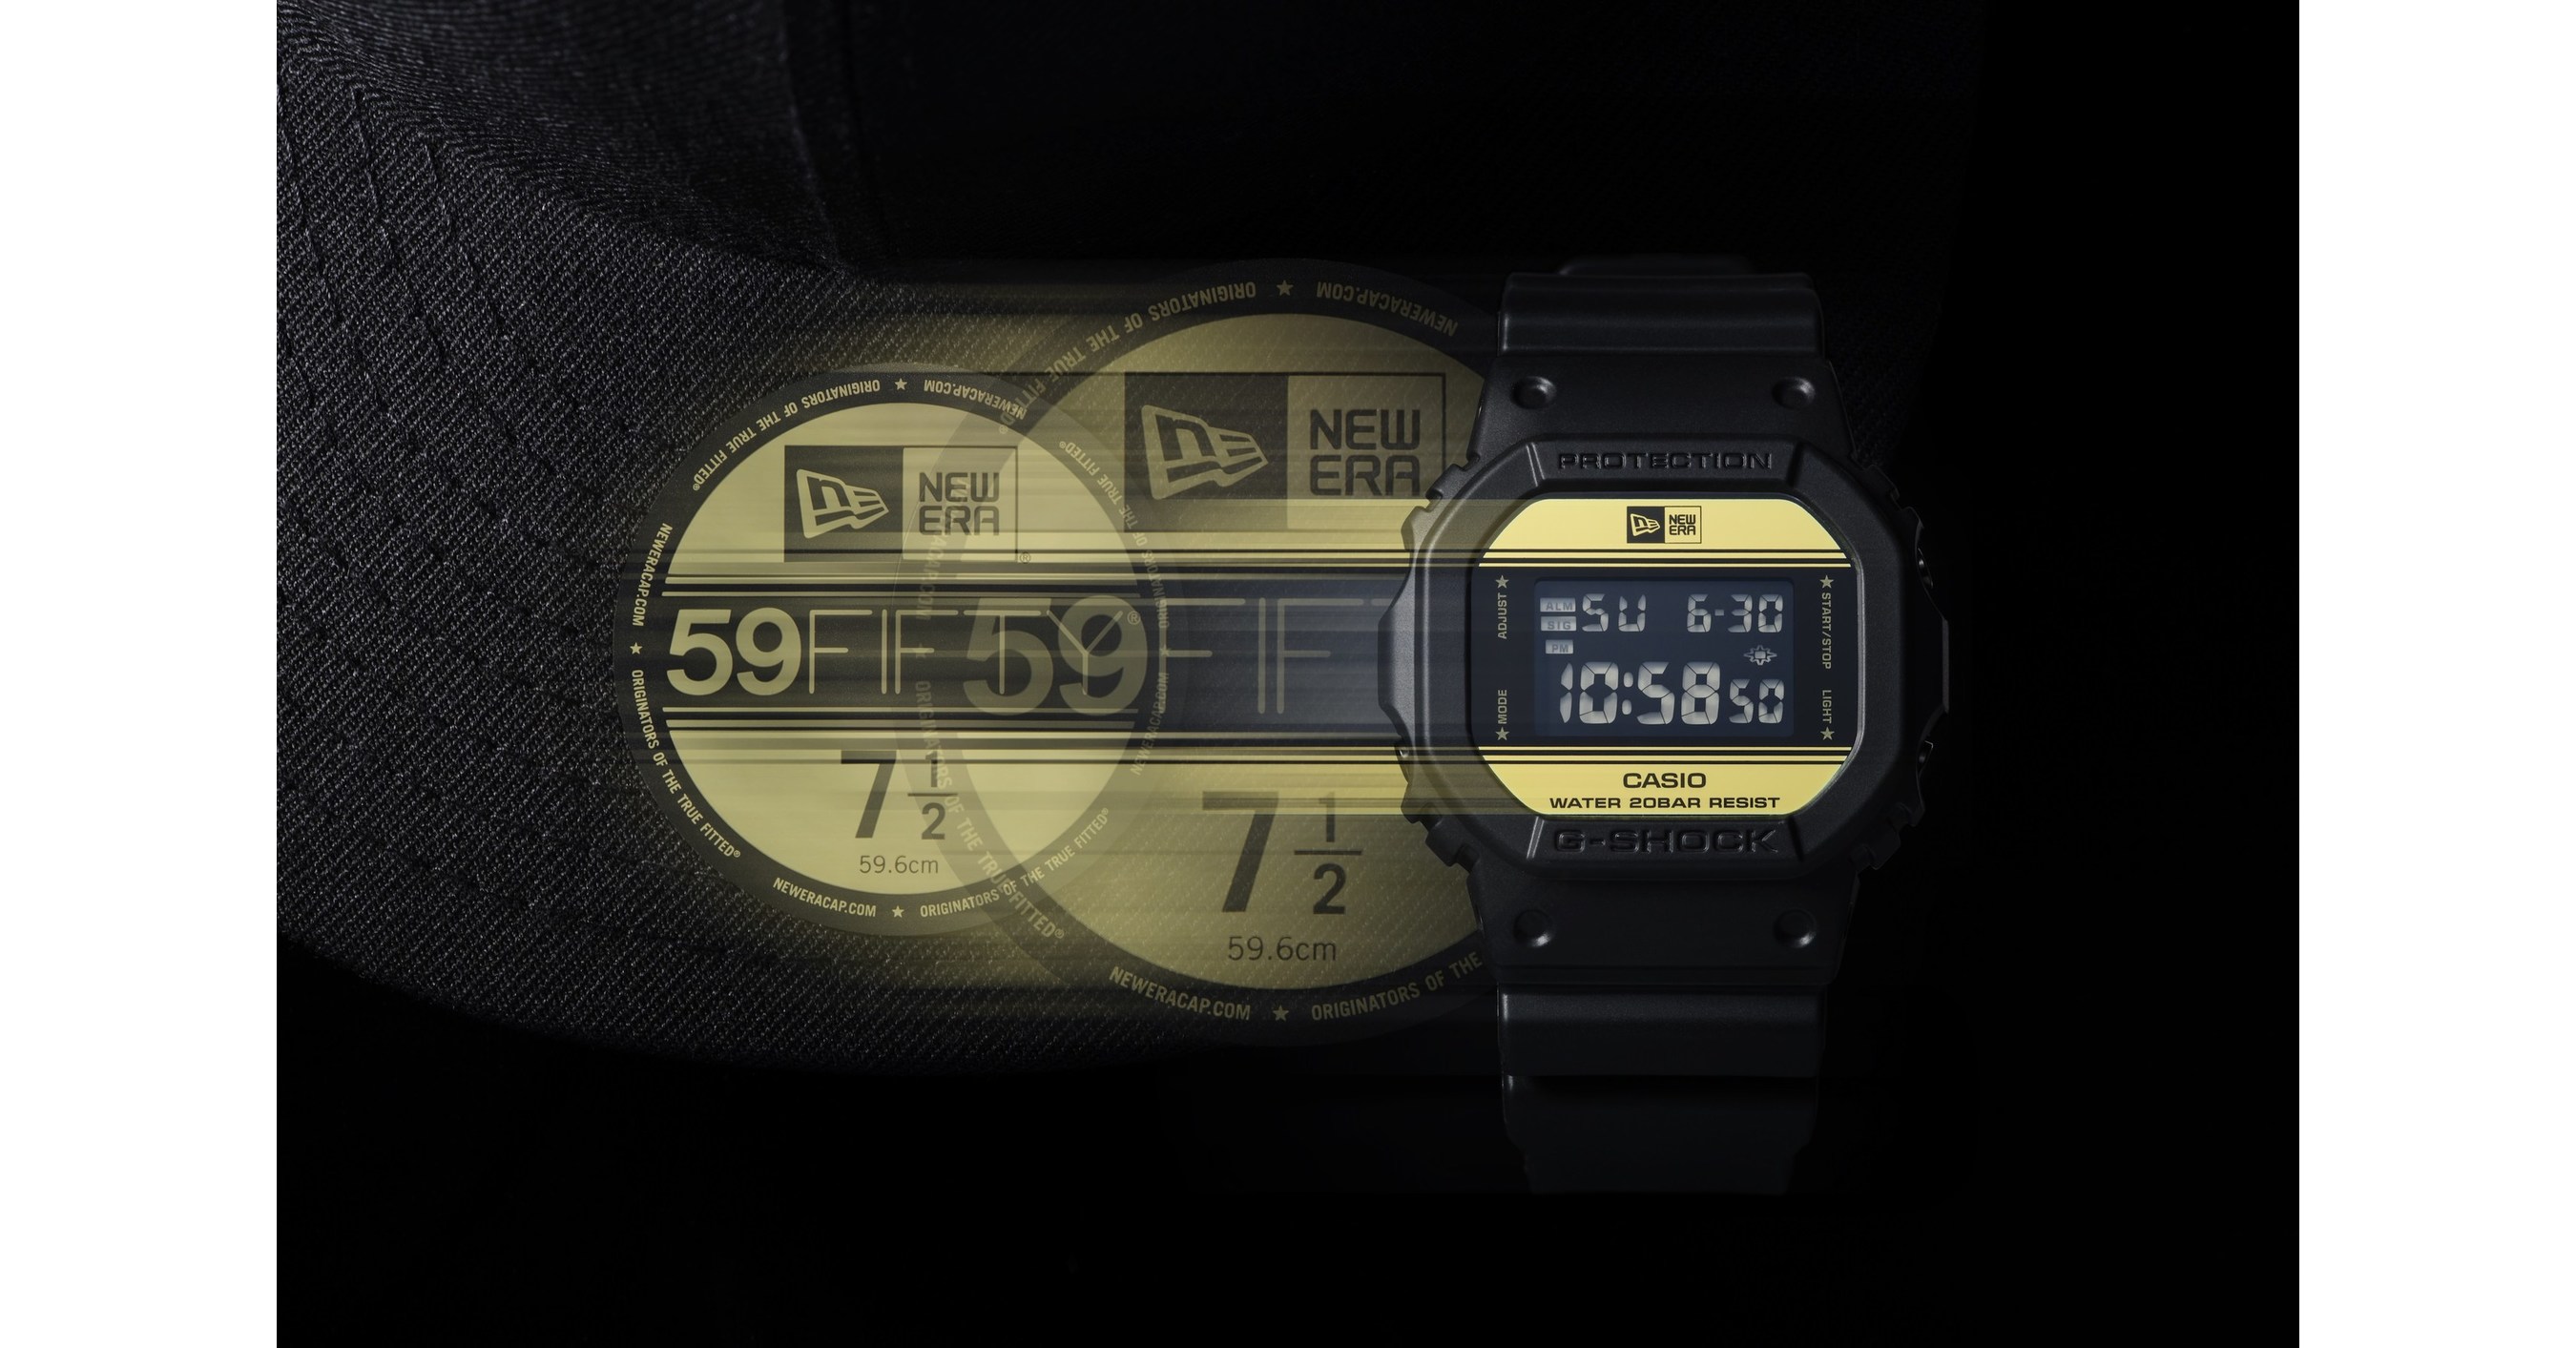 G-SHOCK Partners With Global Headwear Brand New Era On Limited-Edition